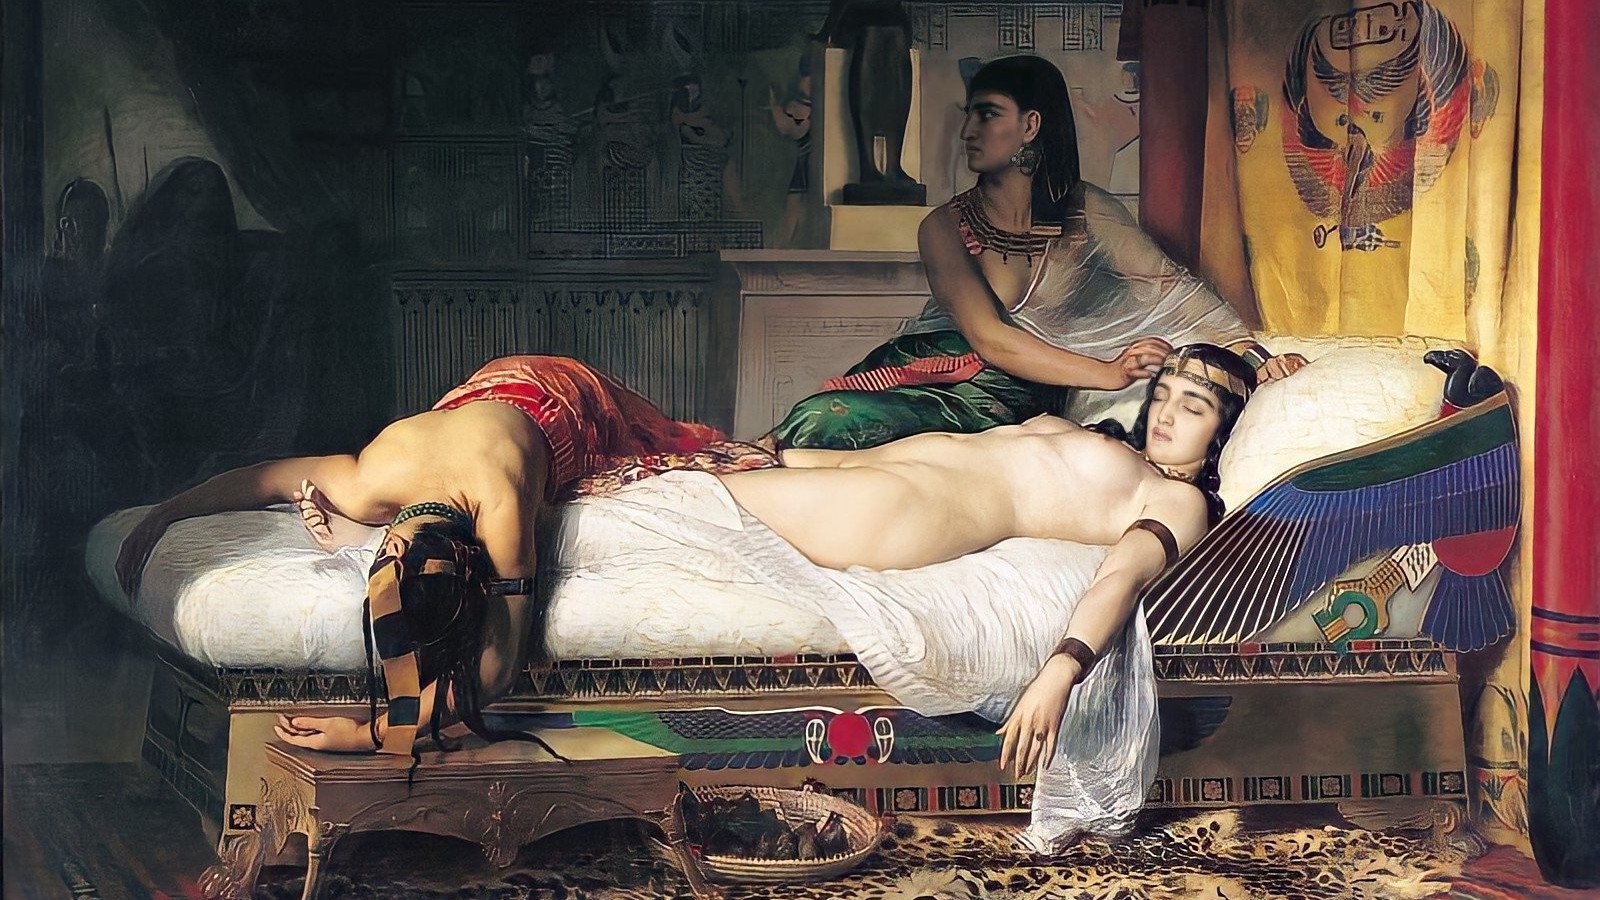 This is a painting called The Death of Cleopatra (1874) by Jean-André Rixens. Cleopatra is lying dead on a bed. She has long black hair and is wearing a gold headpiece. There is another dead body at the end of the bed and a person sitting over her, brushing Cleopatra's hair out of her face.